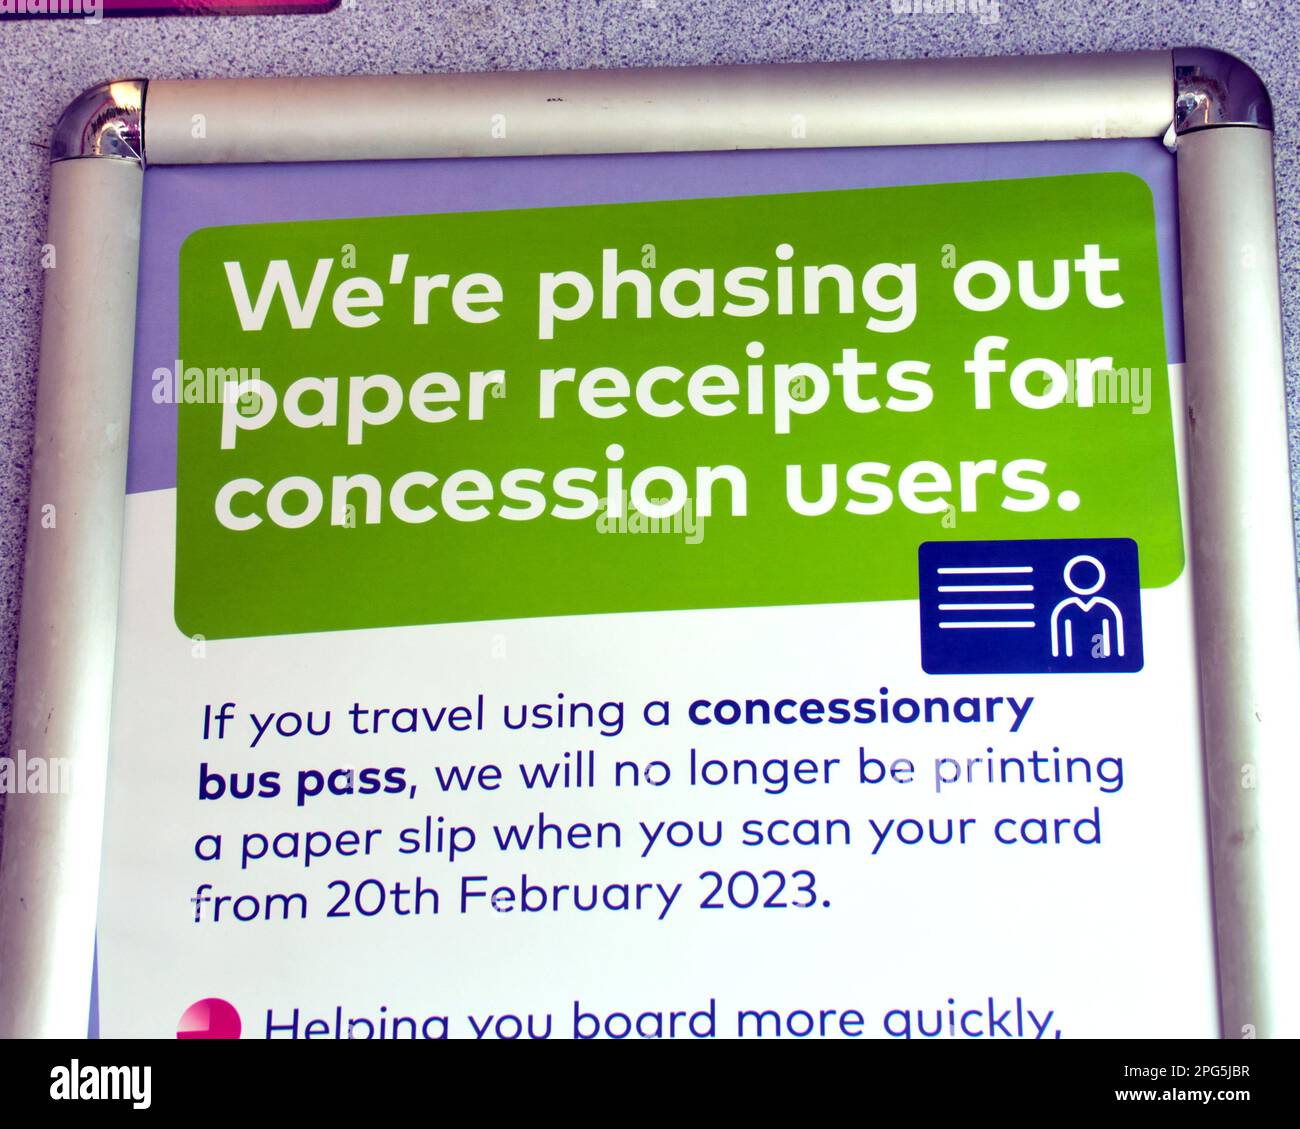 Phasing out of paper receipts or tickets  for concession card users on buses to save paper littering vehicles Stock Photo